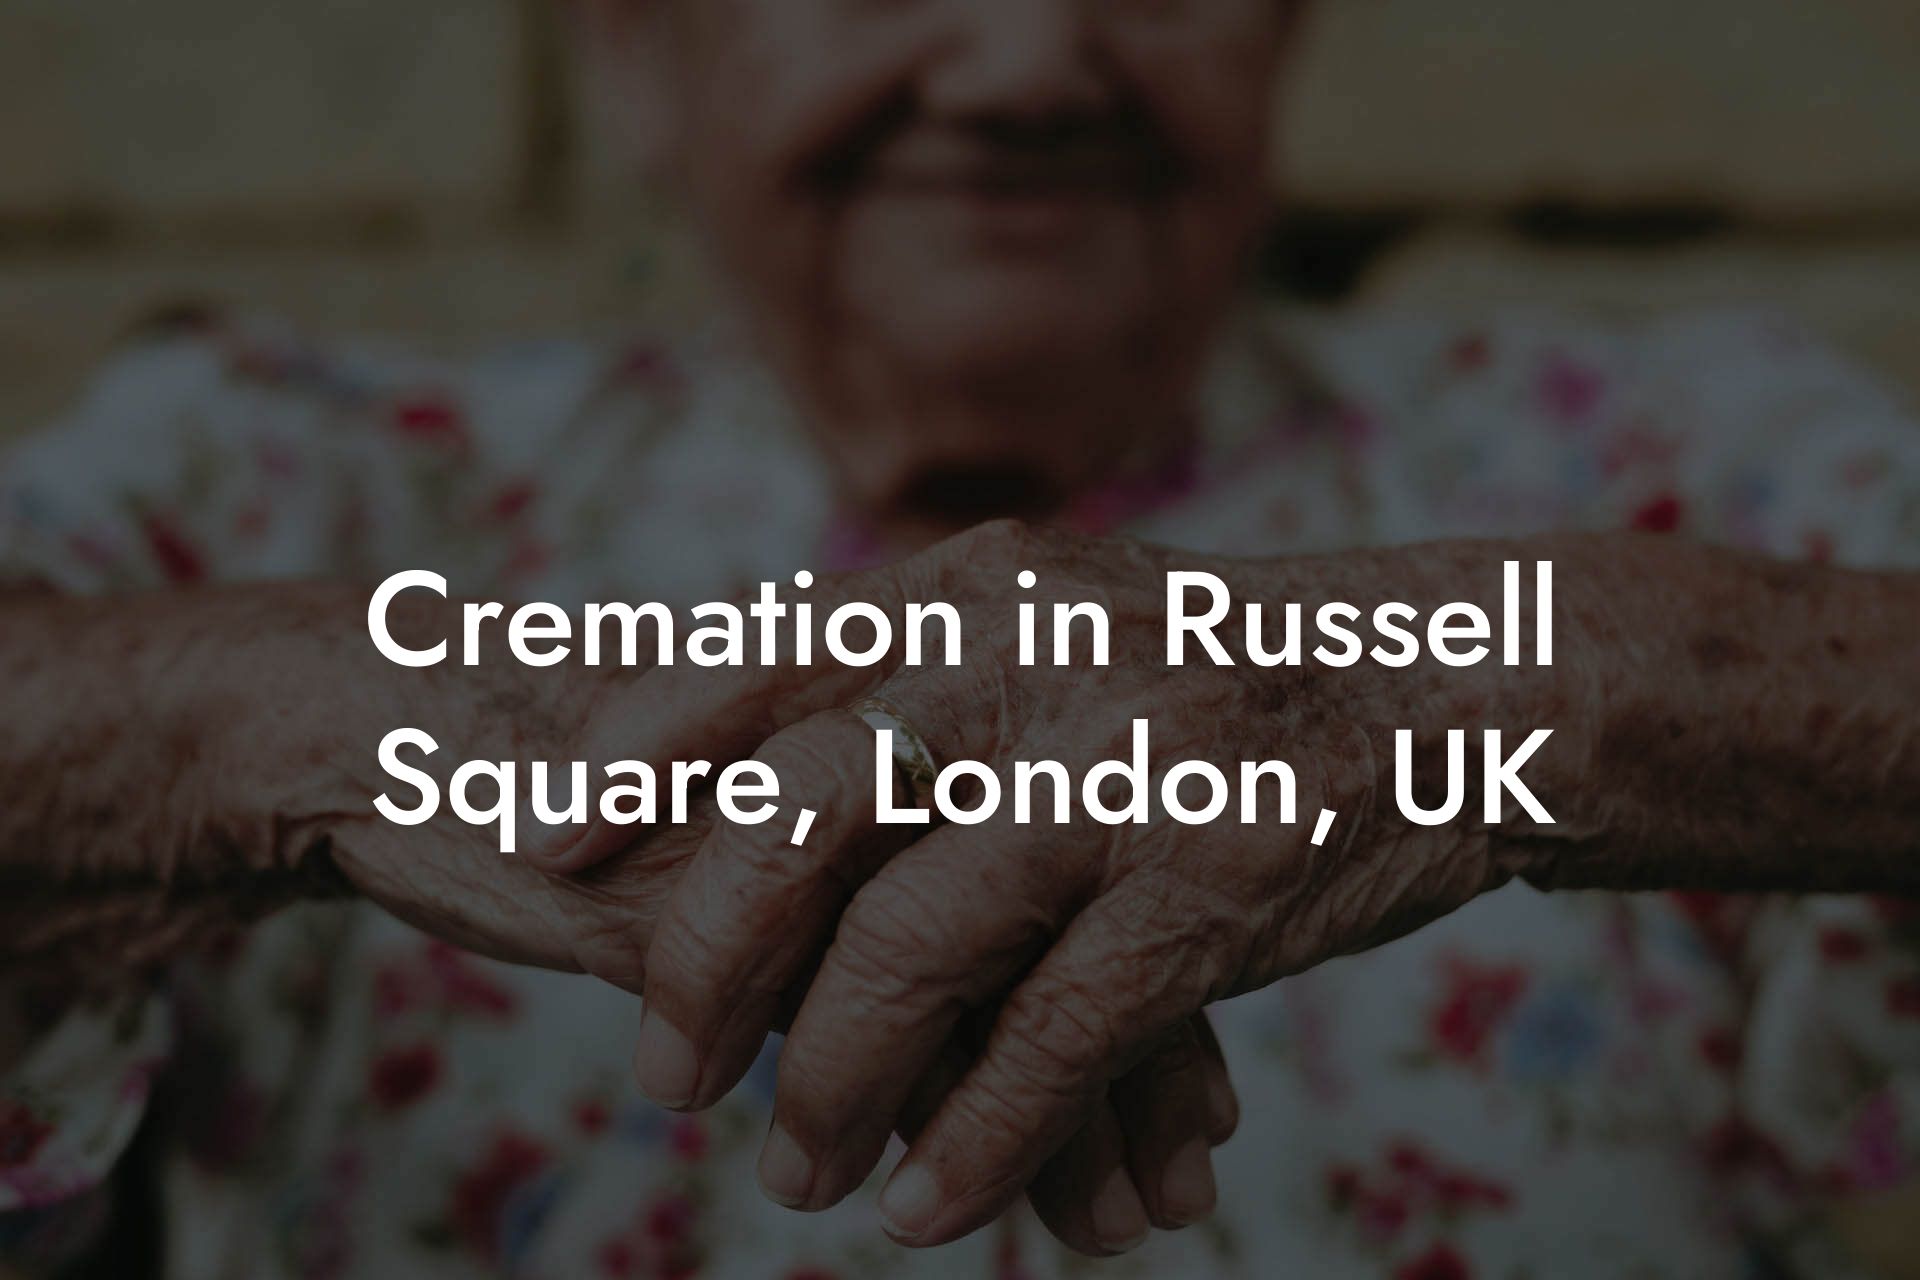 Cremation in Russell Square, London, UK